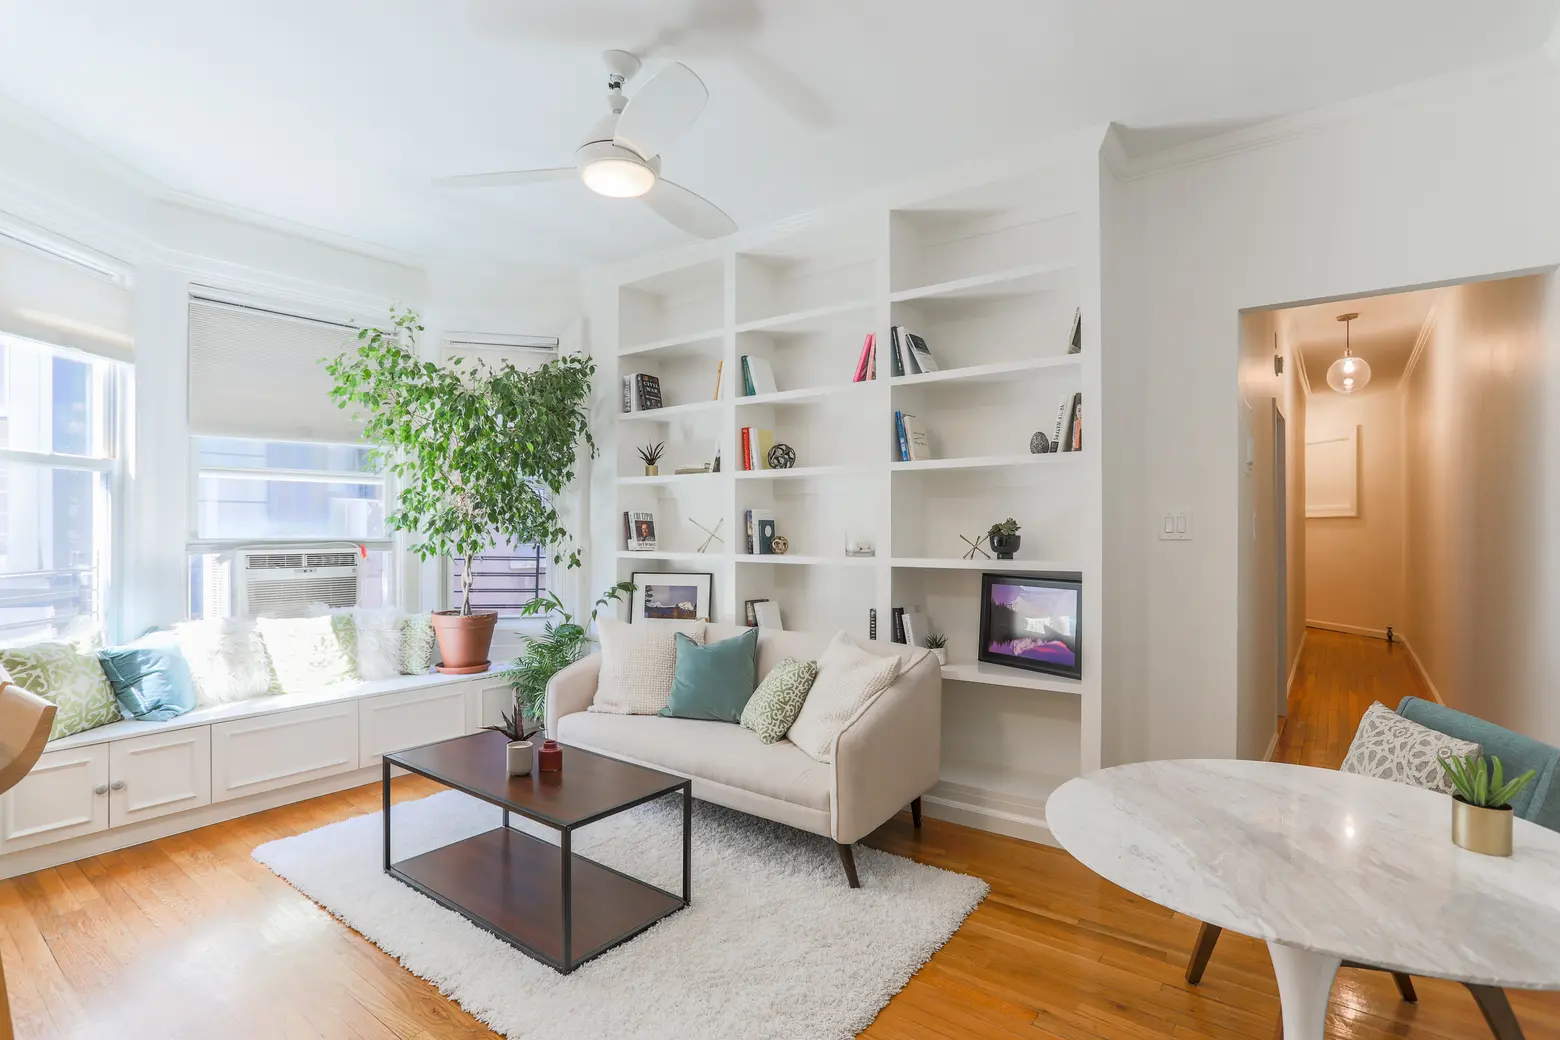 Cozy Upper West Side two-bedroom with lots of built-ins seeks $749K